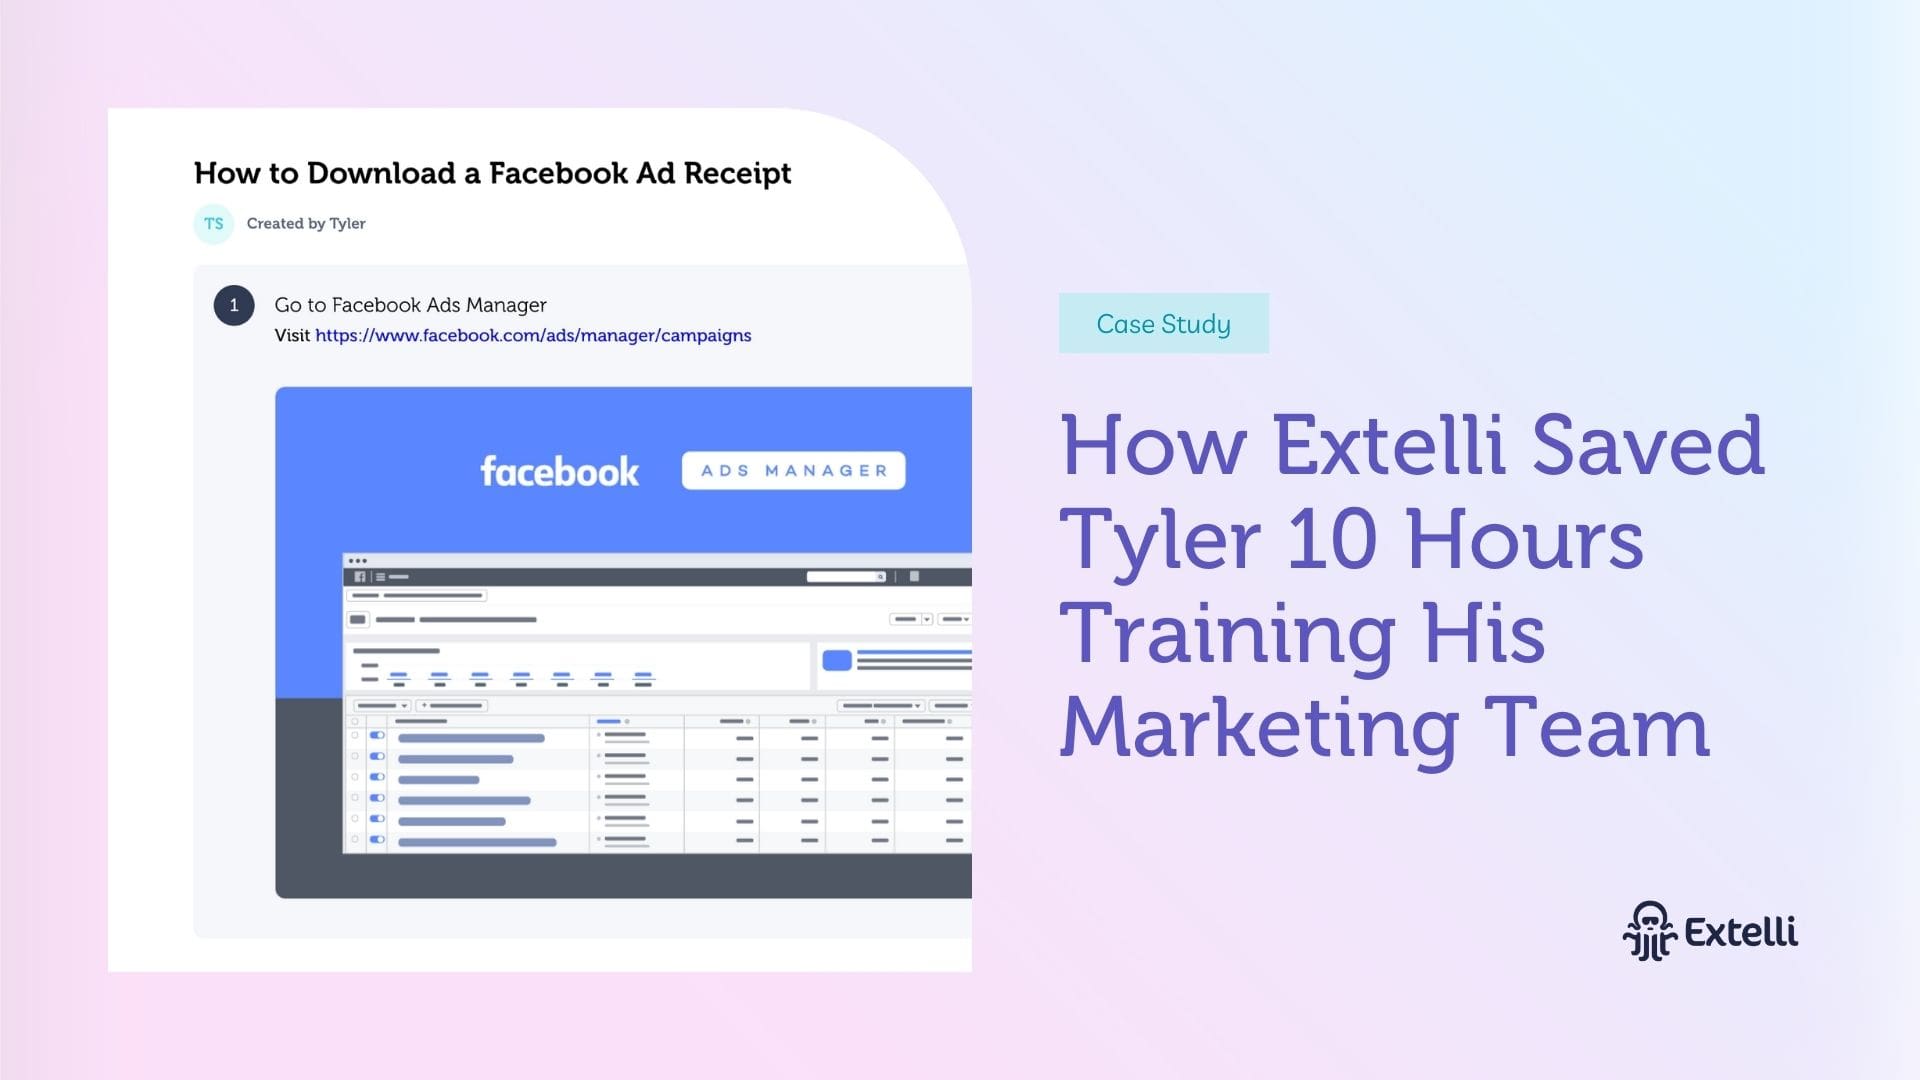 How Extelli Saved Tyler 10 Hours Training His Marketing Team